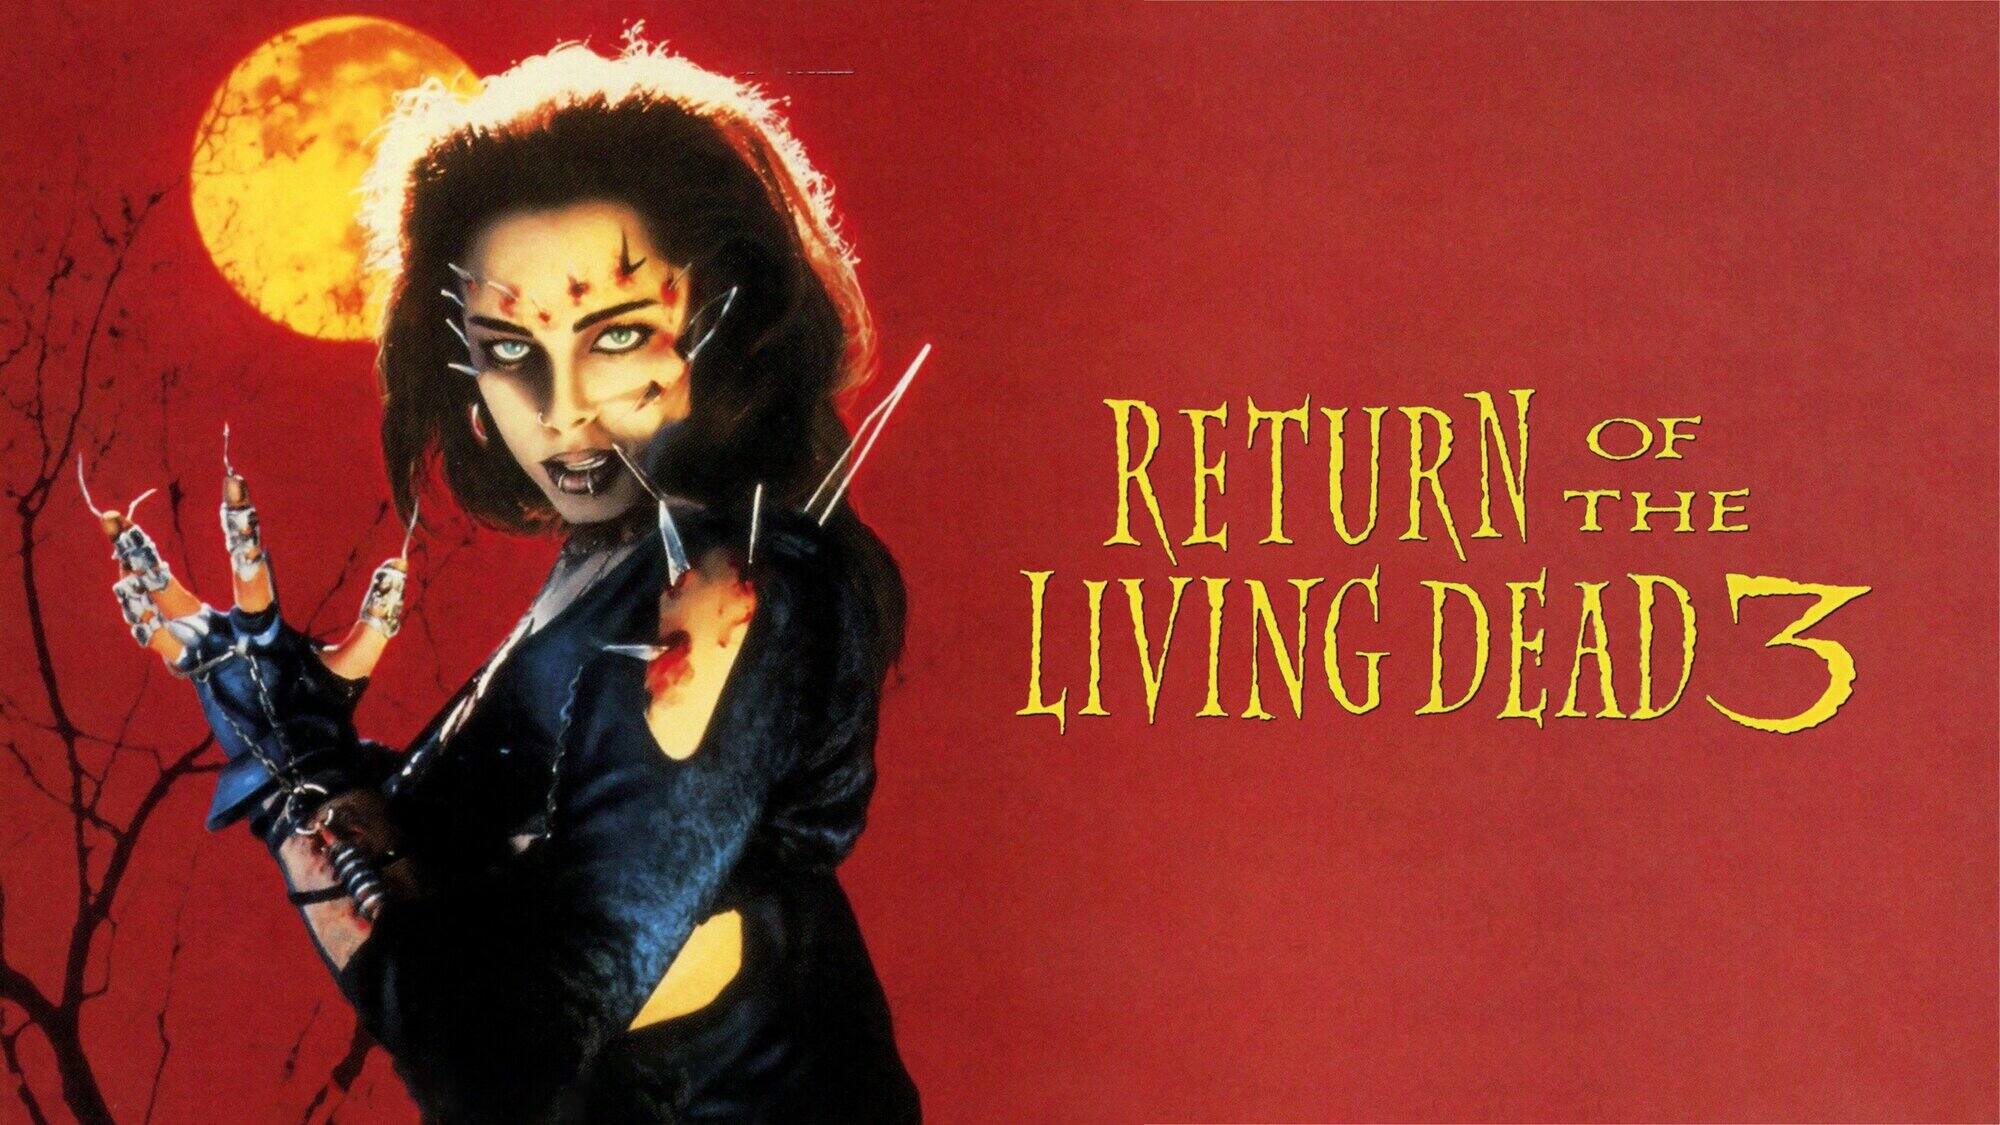 38-facts-about-the-movie-return-of-the-living-dead-iii